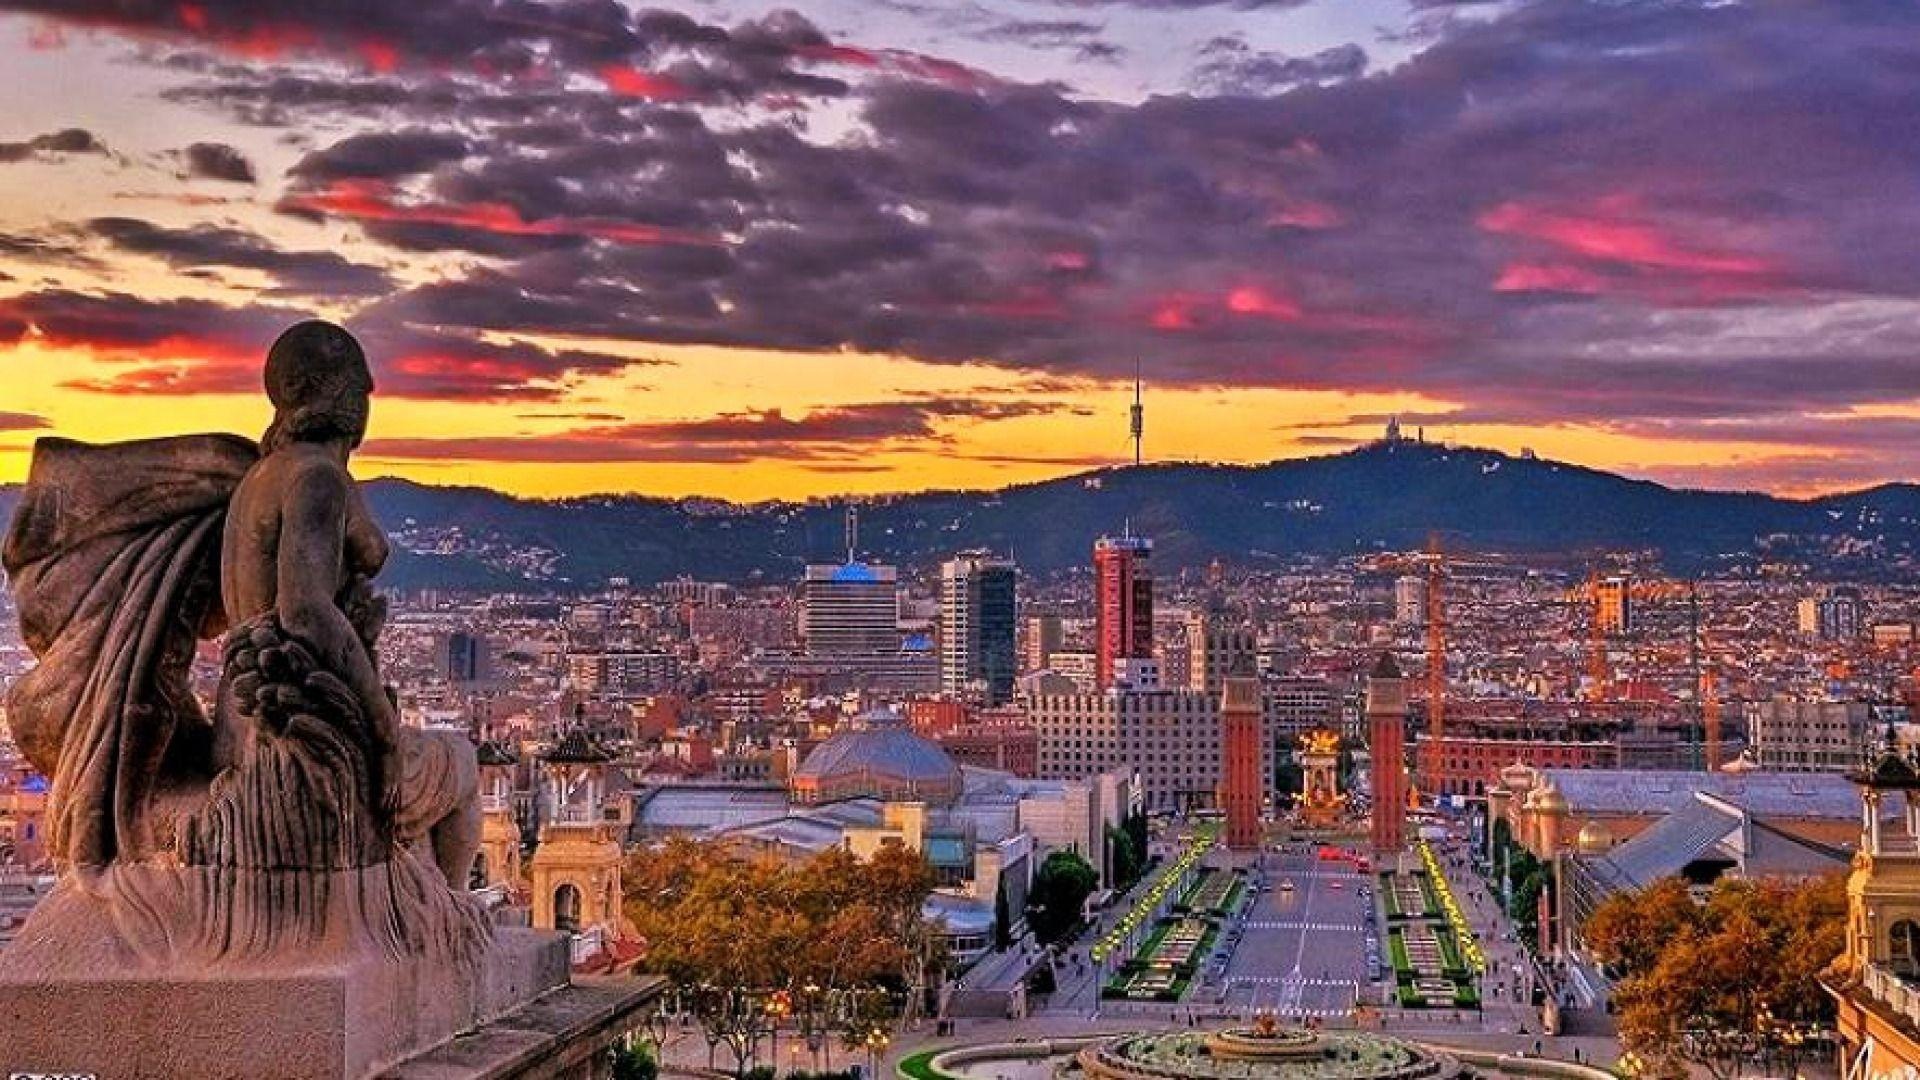 Barcelona City: Place of Spain, one of Barcelona's most important squares. 1920x1080 Full HD Background.